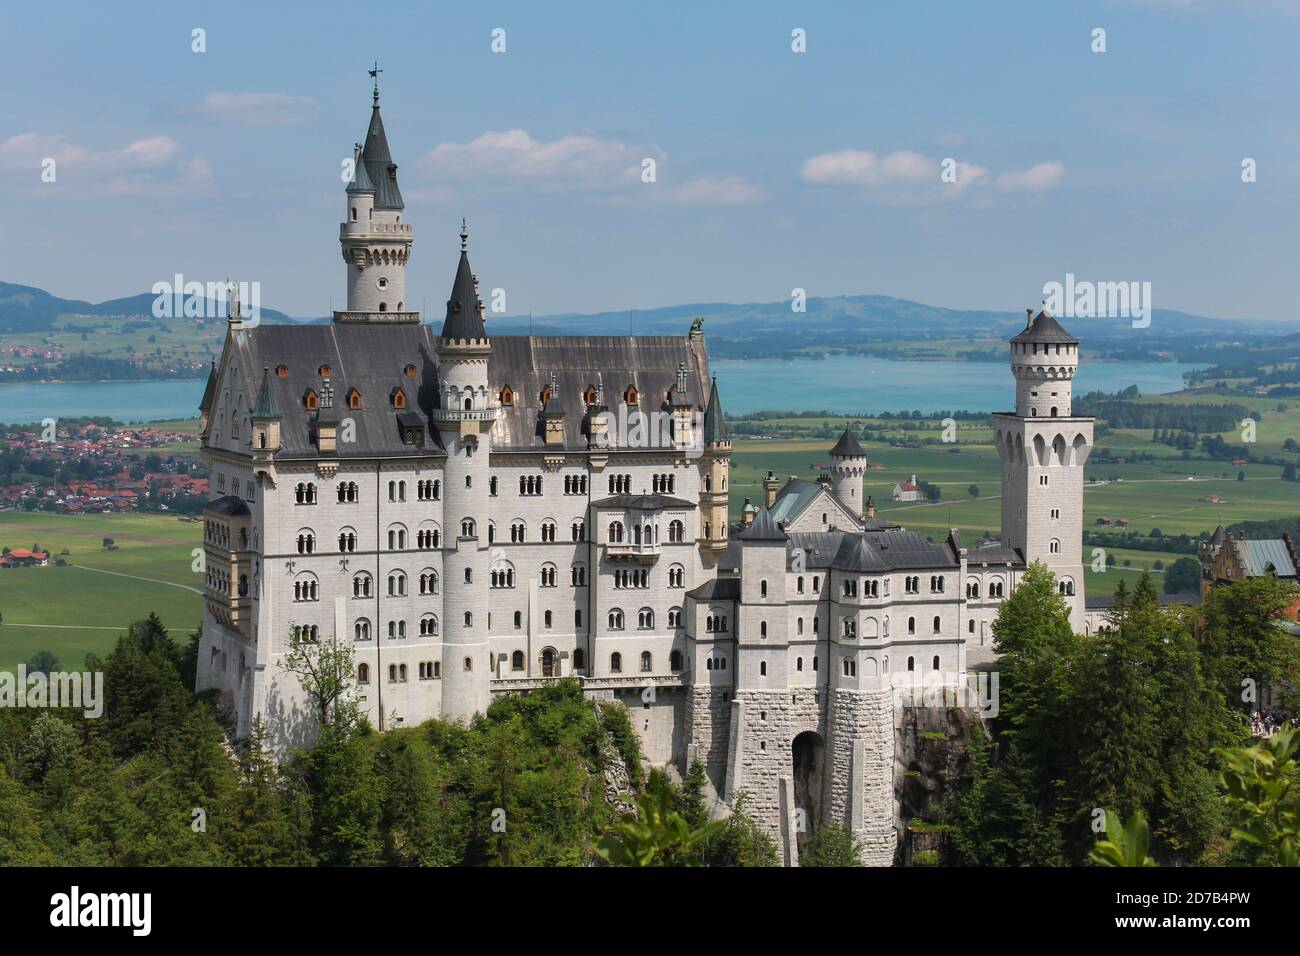 Neuschwanstein Castle,amazing view of the famous castle in Baviera, Germany. Stock Photo